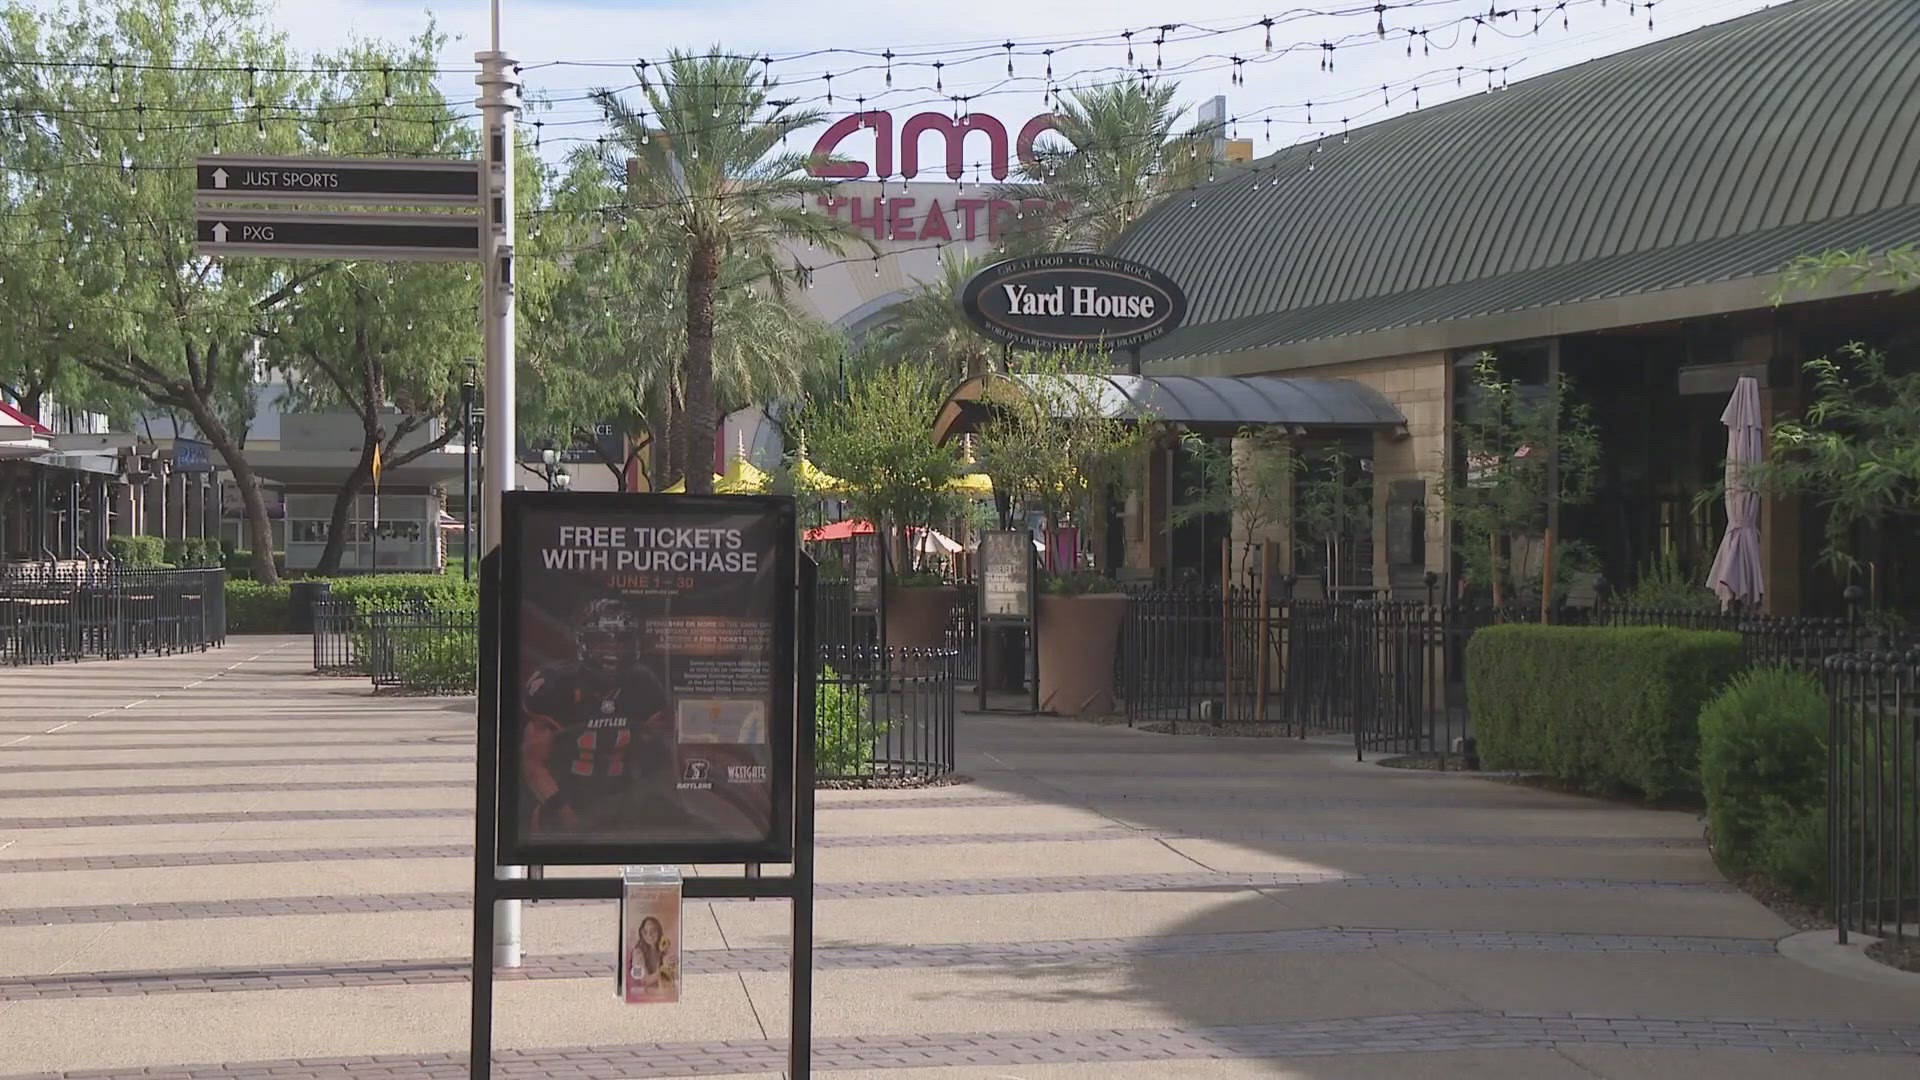 On Friday night, a teen boy was shot at the Westgate Entertainment District in Glendale. 12News learned this is the latest in a recent history of violence there.